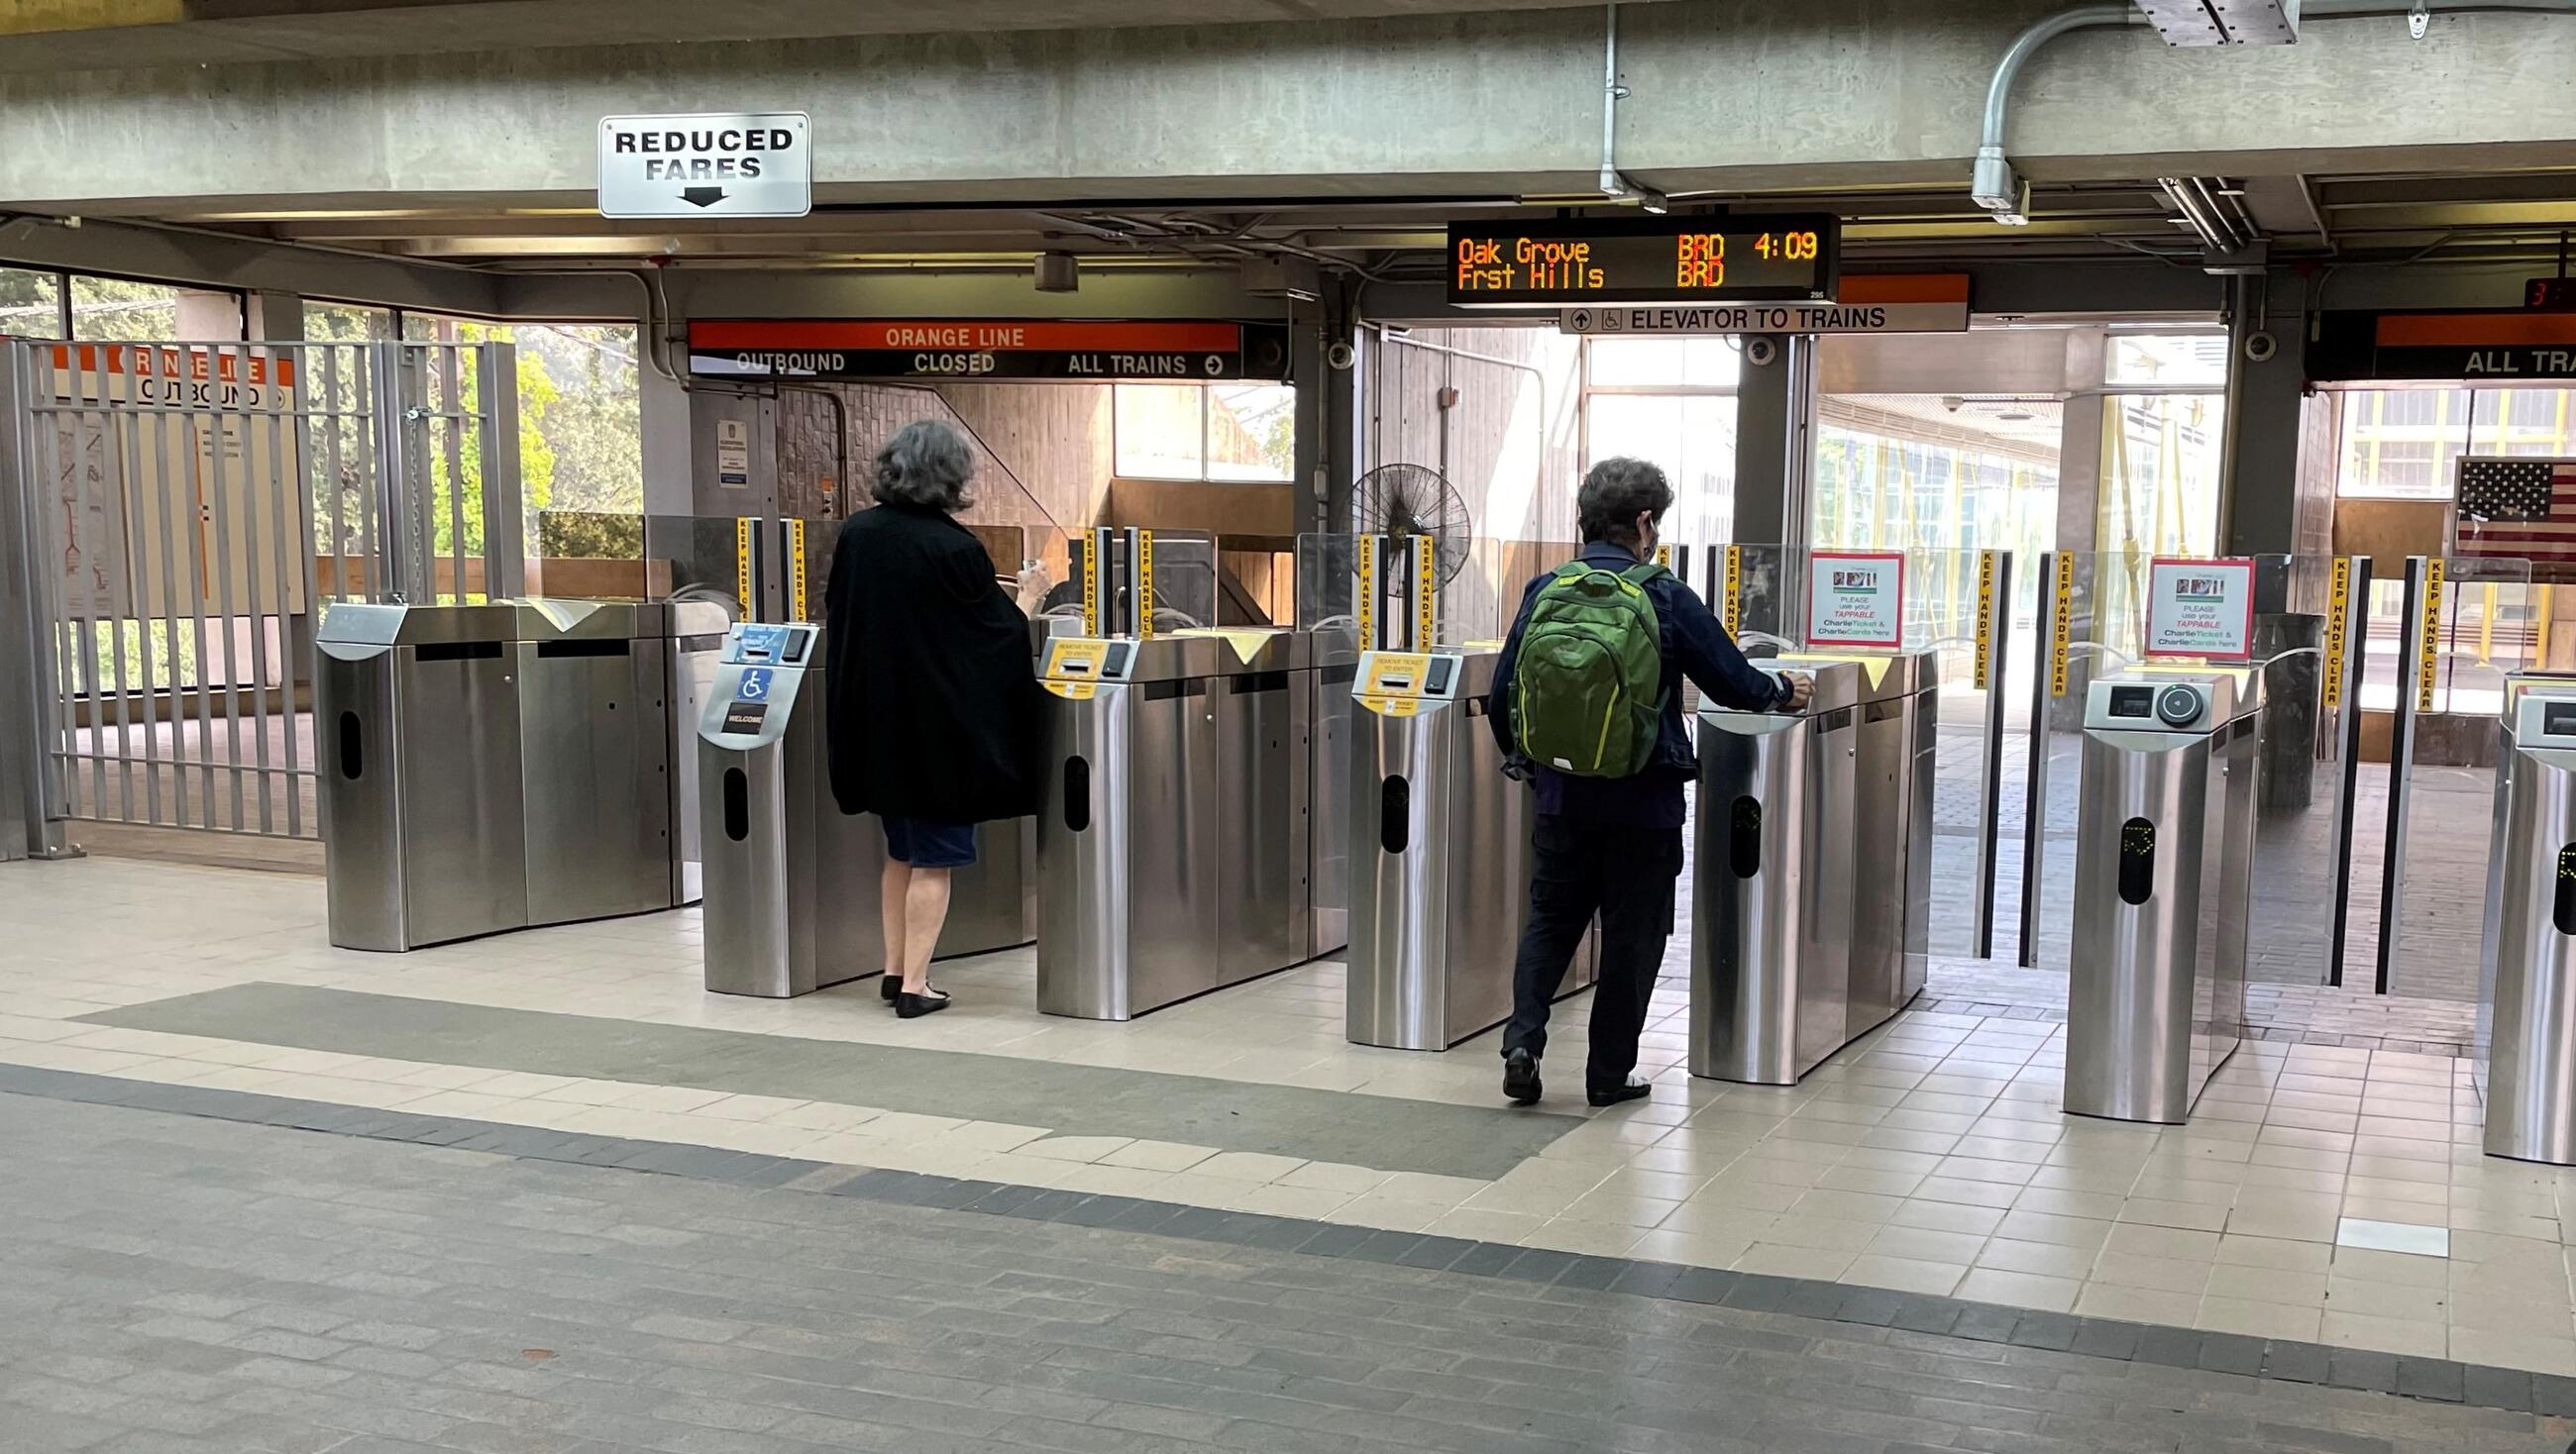 A rider taps their CharlieCard at one of the upgraded fare gates on the Orange Line